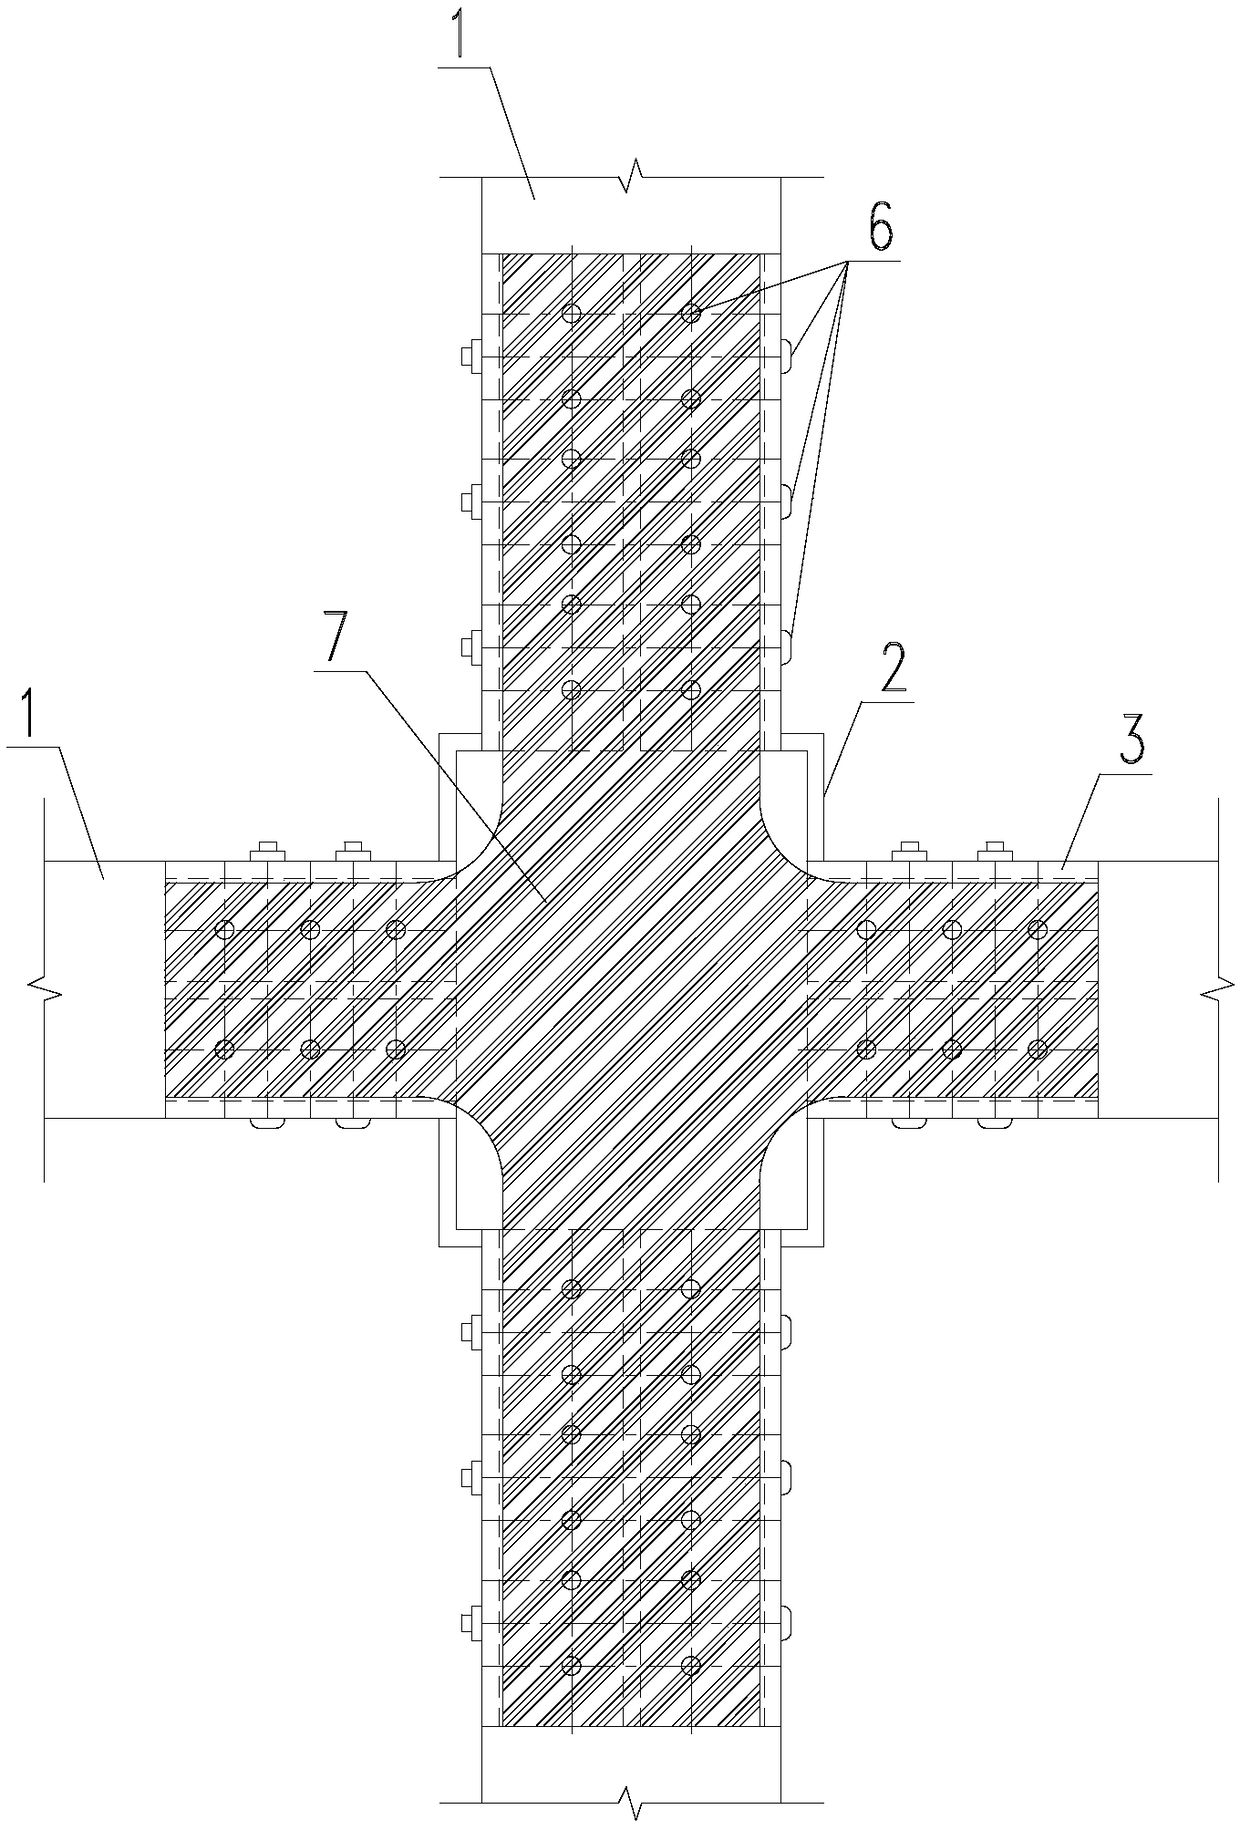 Rigid connection node of wood frame structure